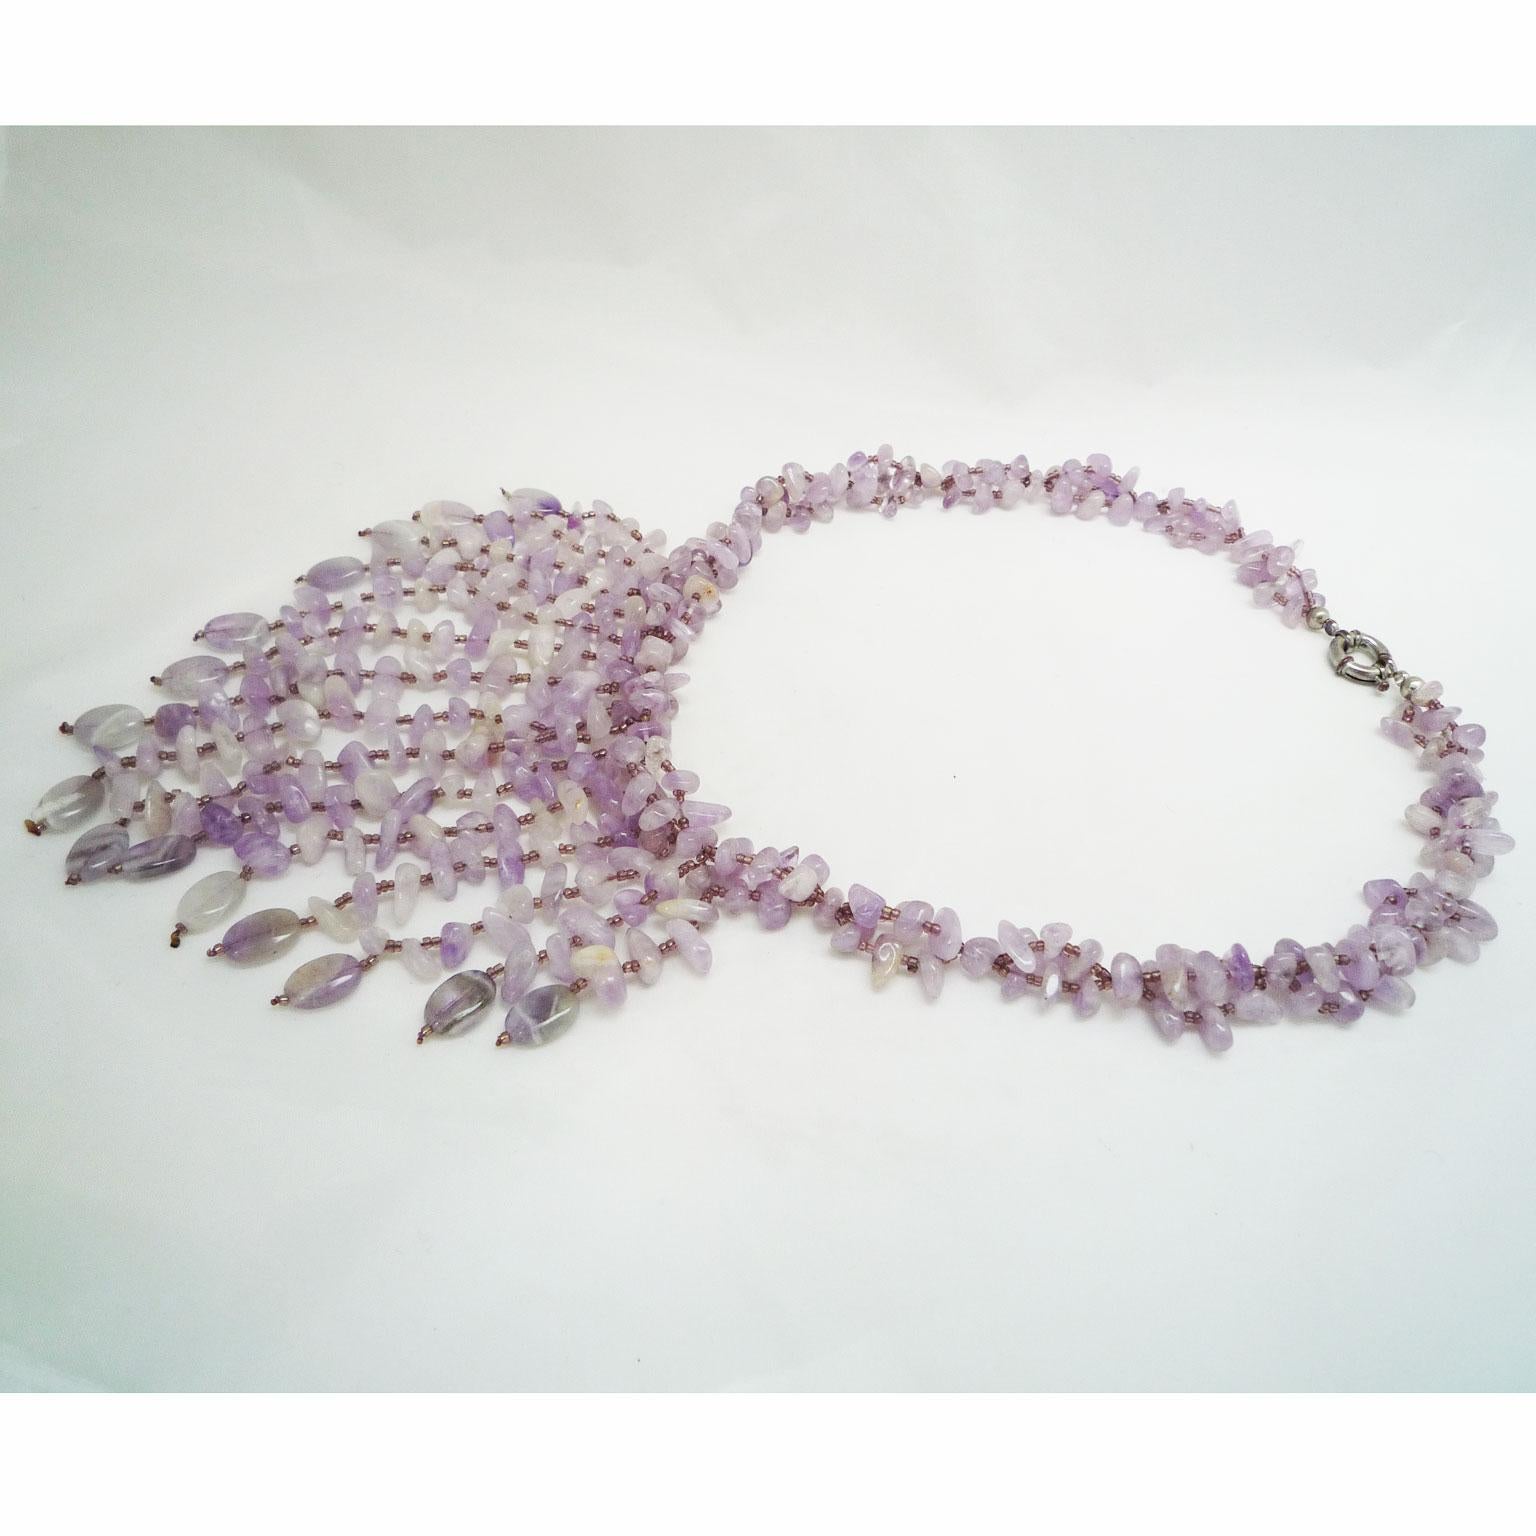 Bead Statement amethyst necklace For Sale